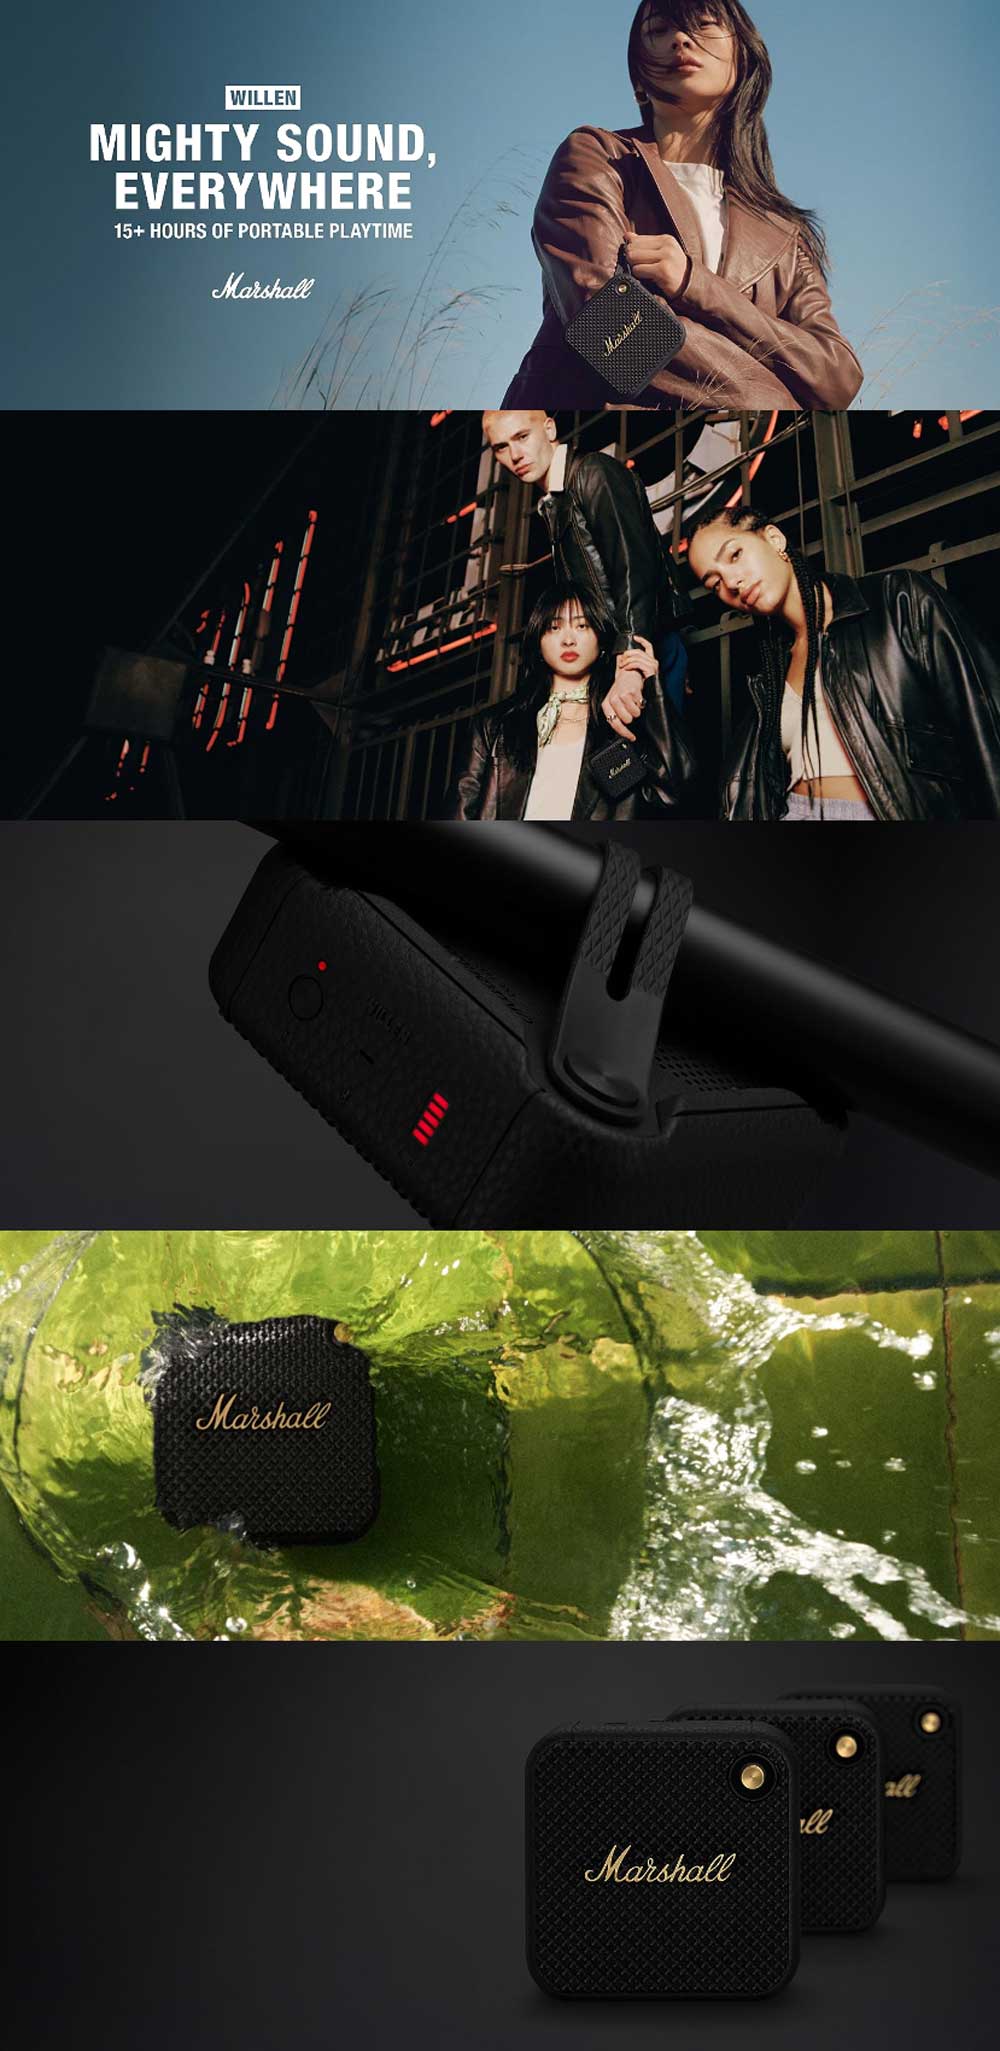 Feature: TAKE MARSHALL SOUND WITH YOU, EVERYWHERE: Willen is the mighty portable speaker that is made to go everywhere with you DESIGN THAT SHAKES OFF THE ELEMENTS: Willen comes with a top-of-class IP67 dust- and water-resistance rating so it’s always ready for the road PLAYTIME THAT WON’T LET YOU DOWN: Ready to roll whenever you are with a hefty 15+ hours of portable playtime on a single charge ATTACH WILLEN ANYWHERE WITH THE STRAP: The ultimate multi-purpose speaker with its flexible positioning and mounting strap PAIR, PLAY AND BRING THE LOUD: The shortest distance between you and your music is Willen – just pair and play without any complicated set-up CONNECT MORE SPEAKERS WITH STACK MODE: Stack Mode raises the stakes with a sound larger than Willen – combine multiple speakers and create a sound as big as your imagination BUILT-IN MICROPHONE: Make sure your voice is heard with Willen’s built-in microphone. Answer and reject calls using the front-mounted control knob and enjoy some hands-free chat